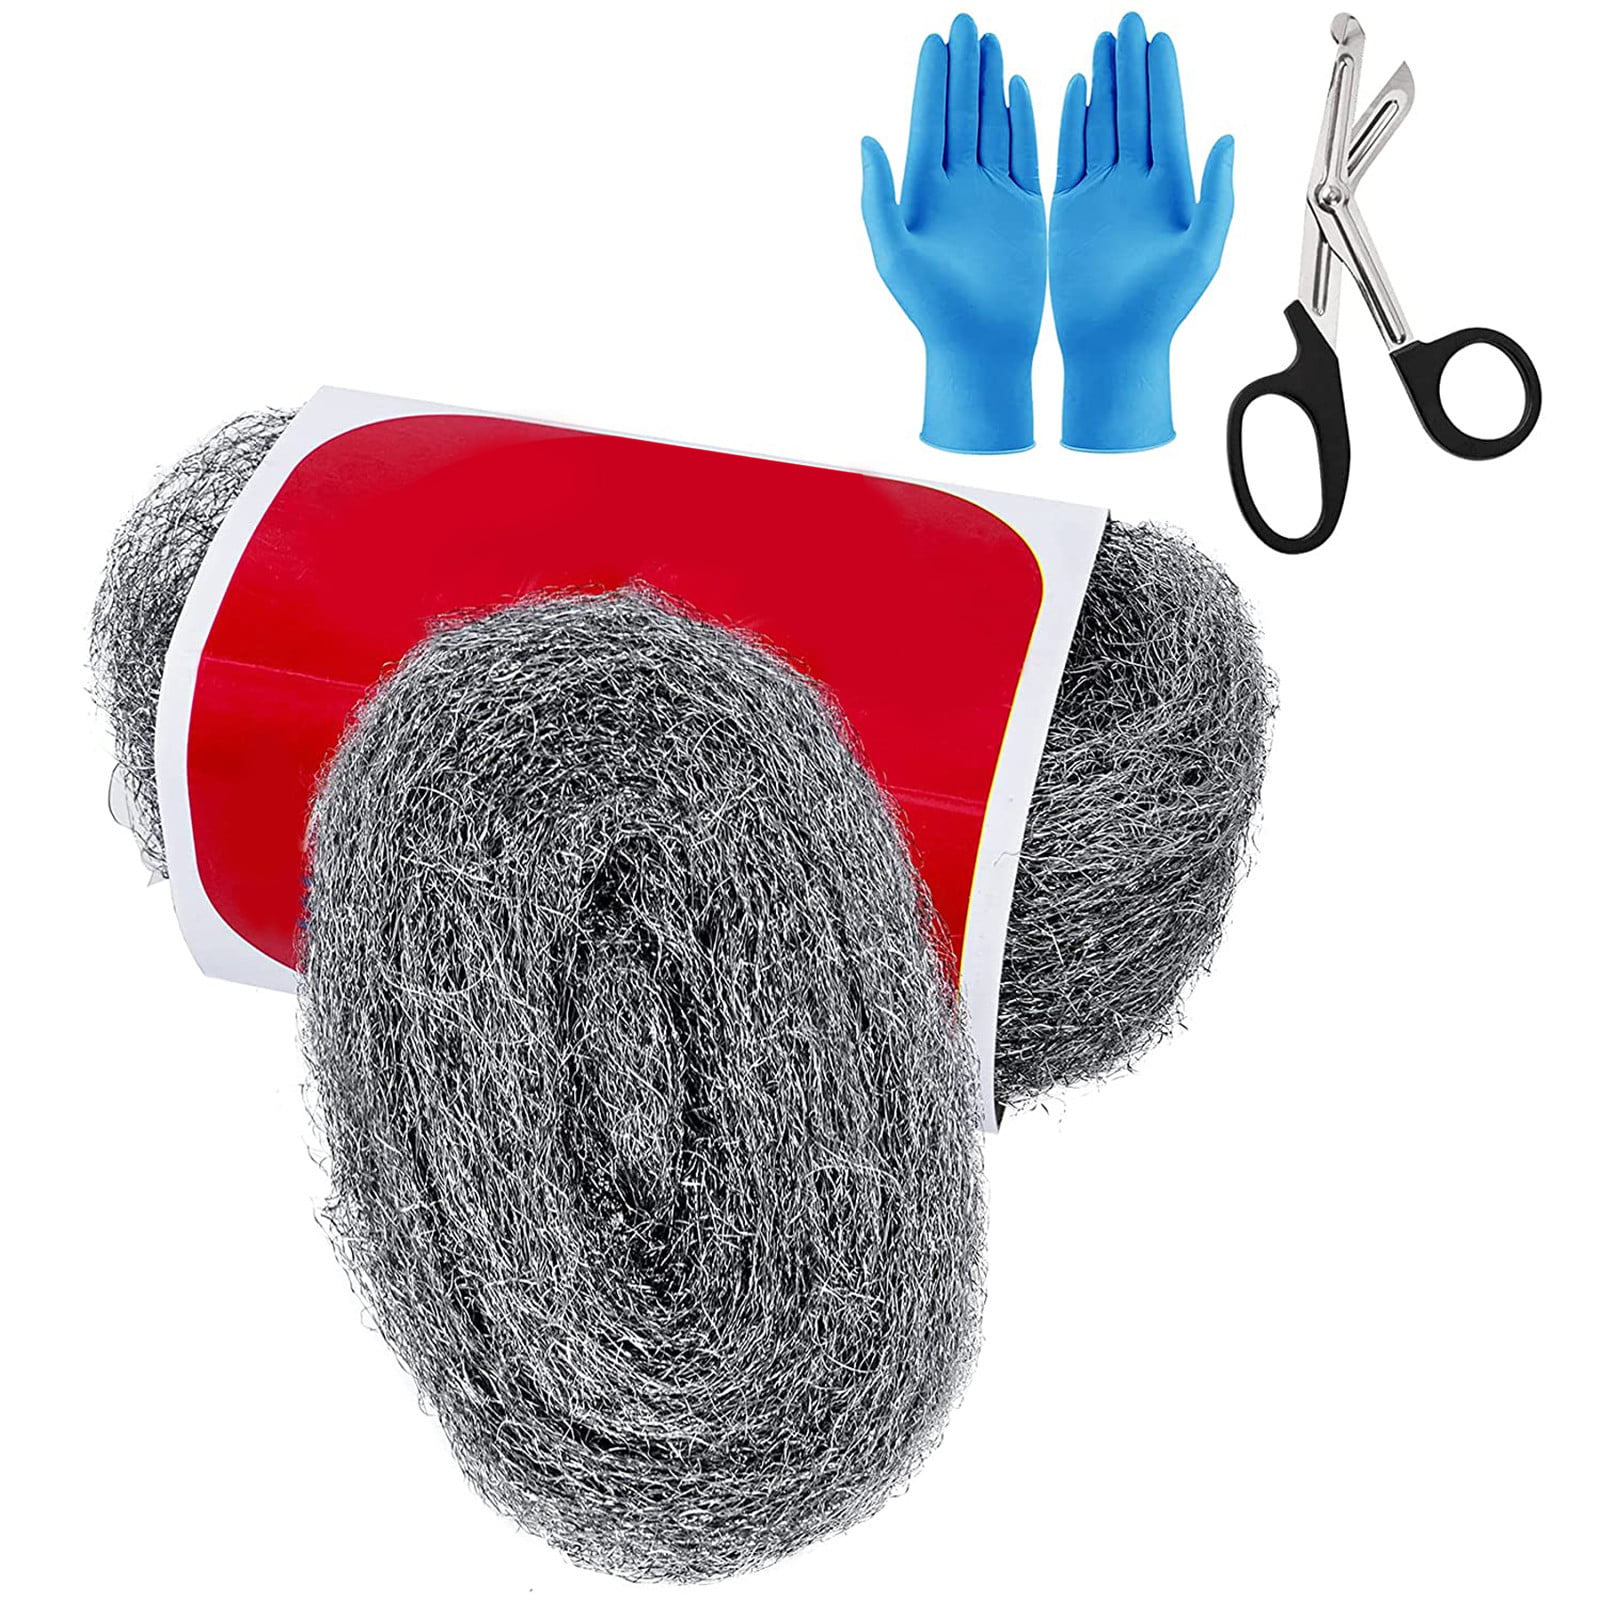 Steel Wool Mice Control 4'' * 21' Total Rodent Control Fill Fabric, Steel  Wool Pads Mouse Blocker Keep Mice Away from Holes Wall Cracks Gaps(2 Rolls)